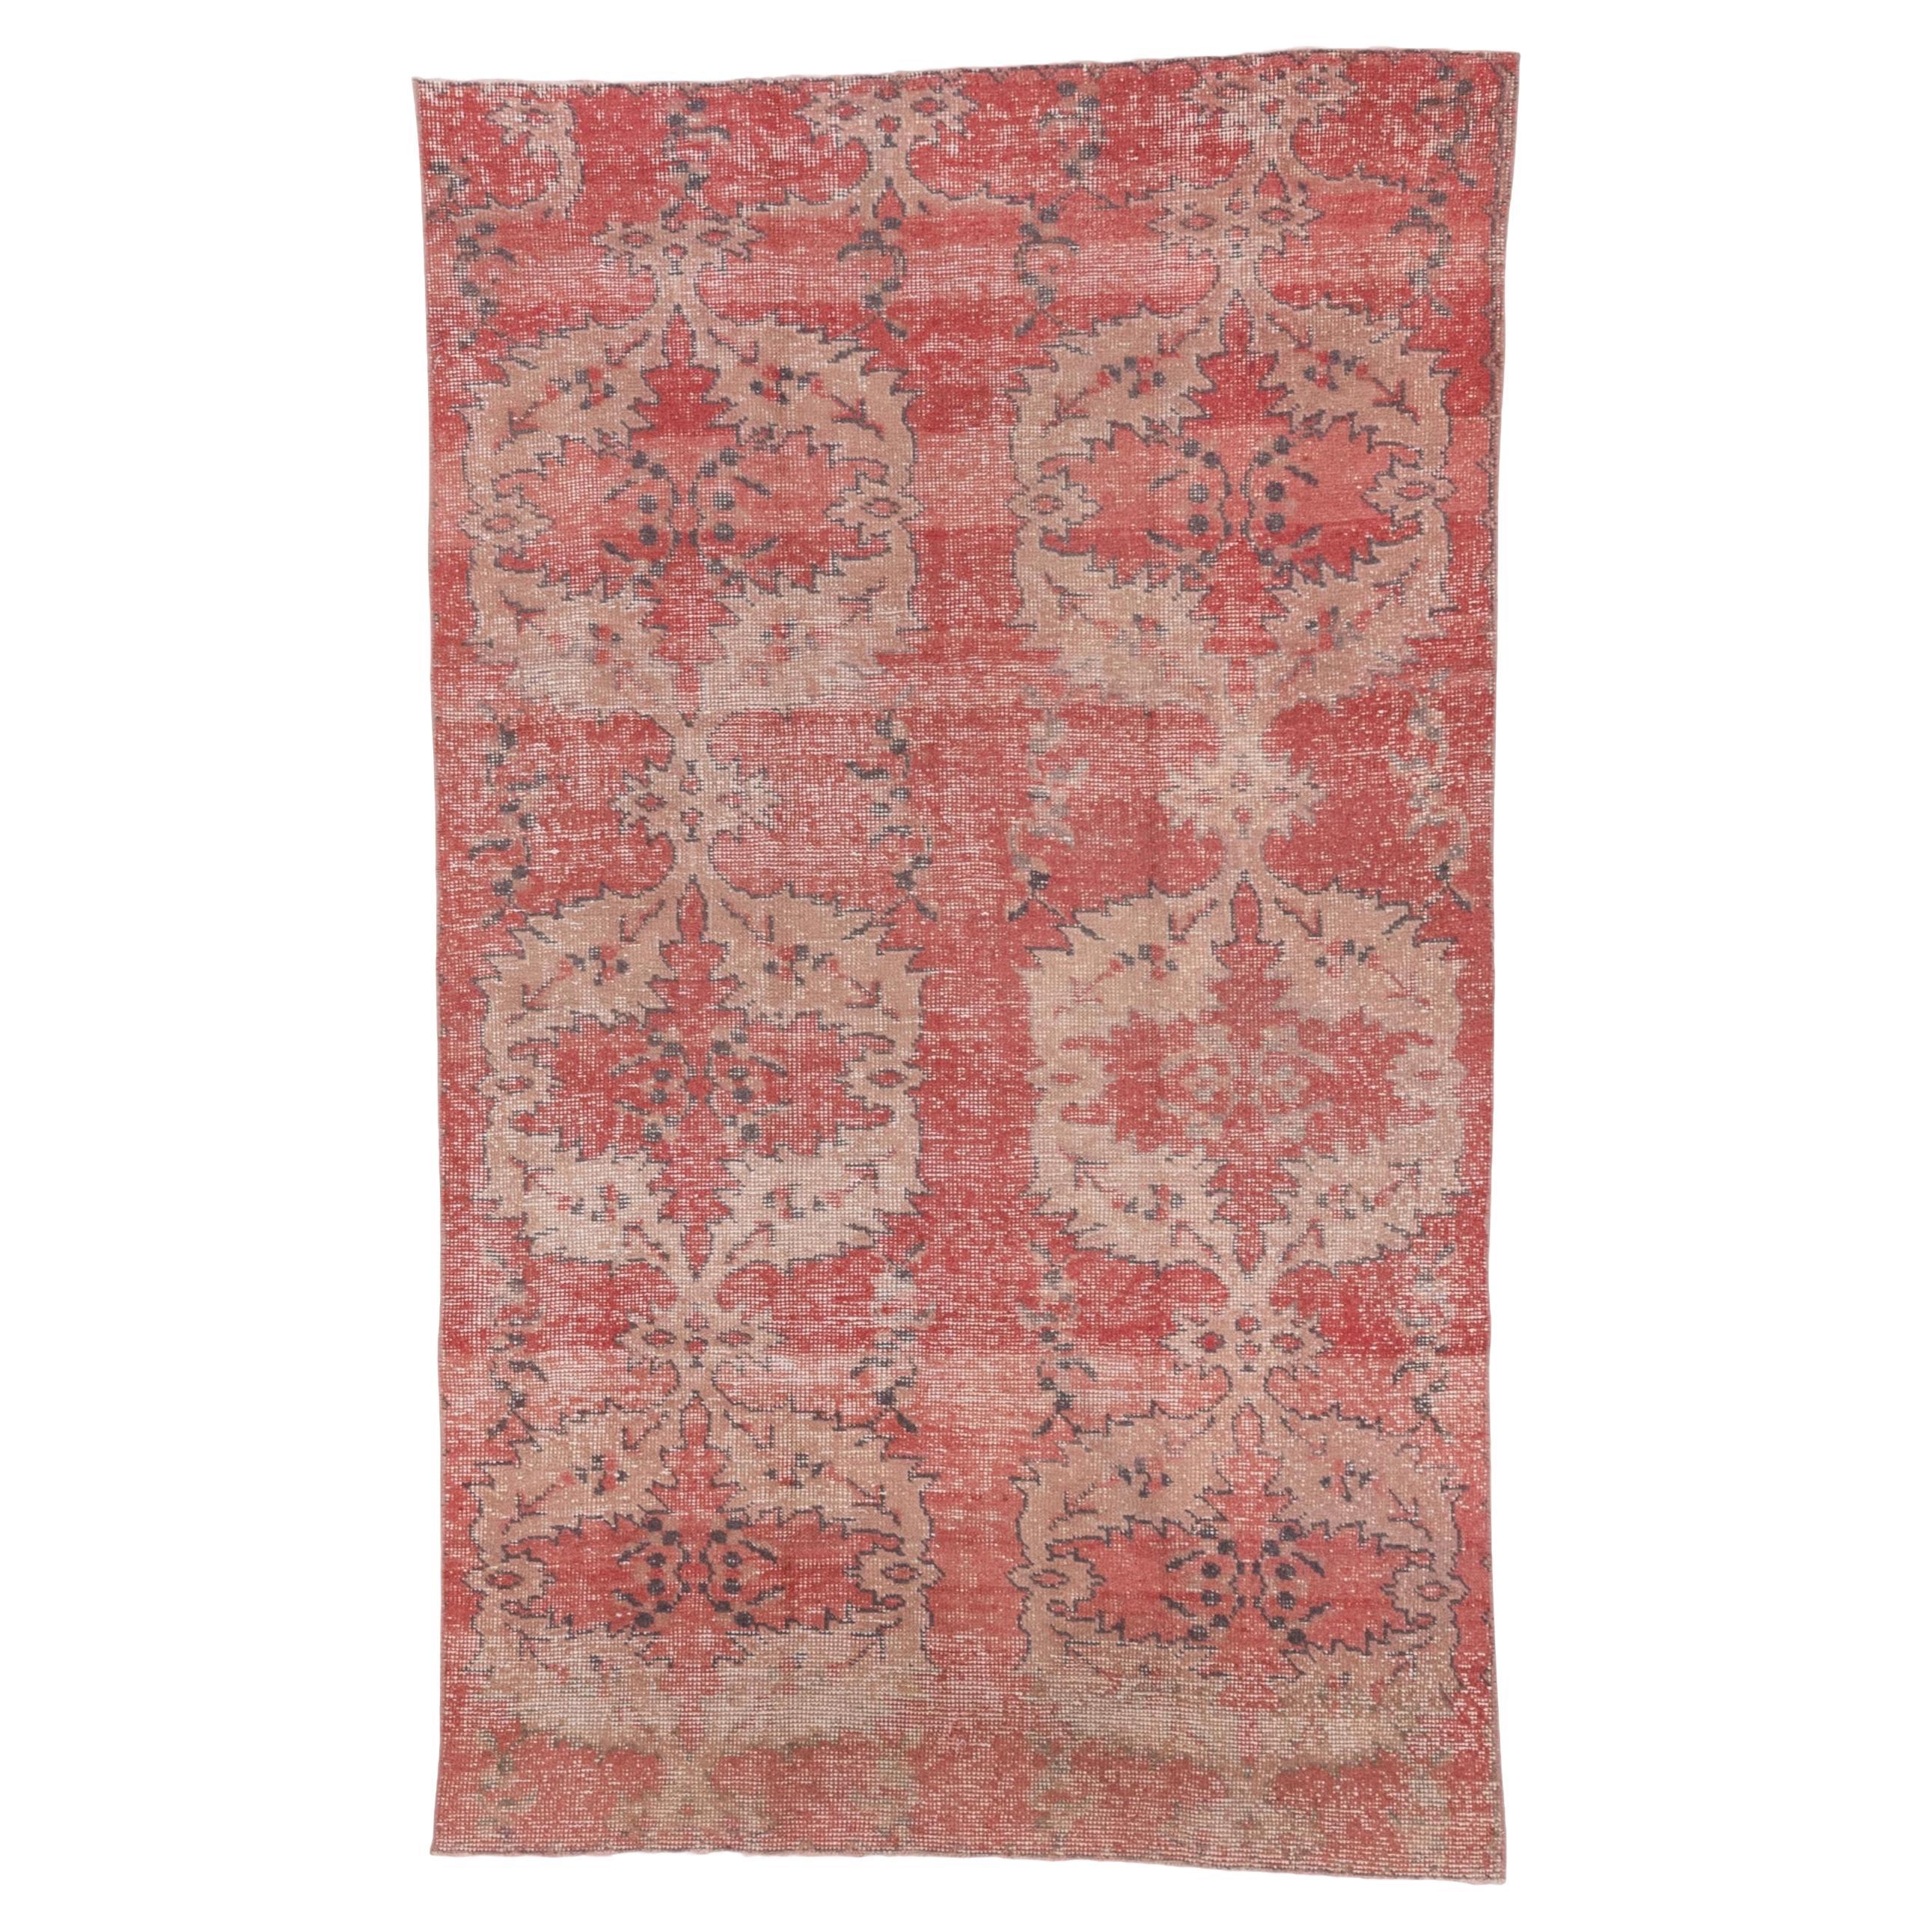 Turkish Faded Red Rug with Geometric Patterns Across For Sale